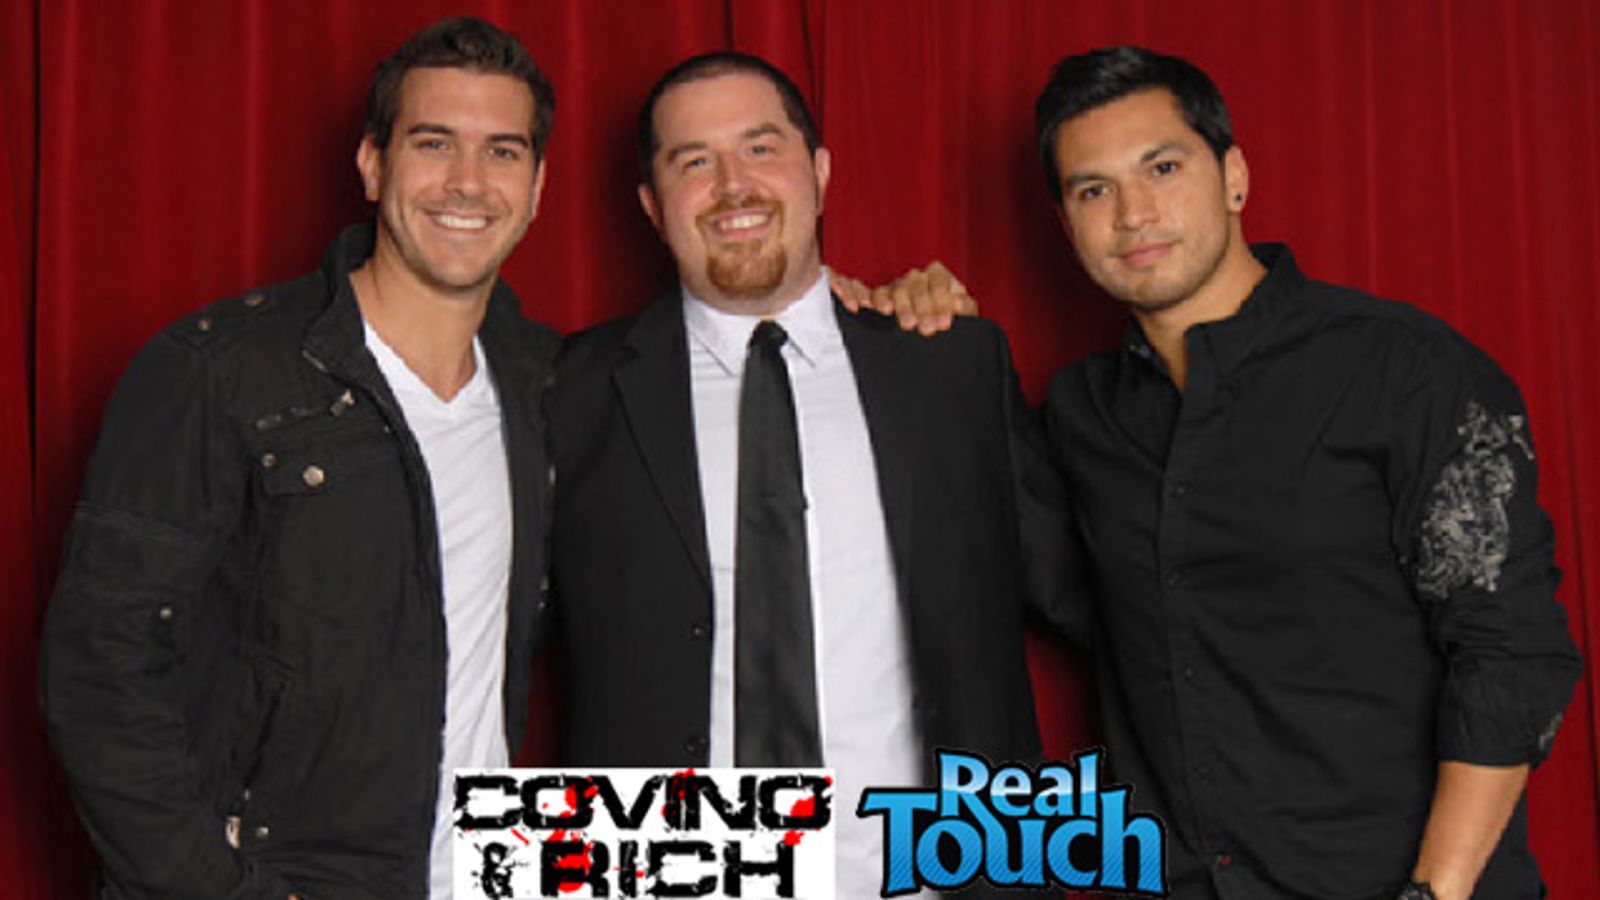 AEBN Teams With Covino and Rich Radio Show To Give Away RealTouch